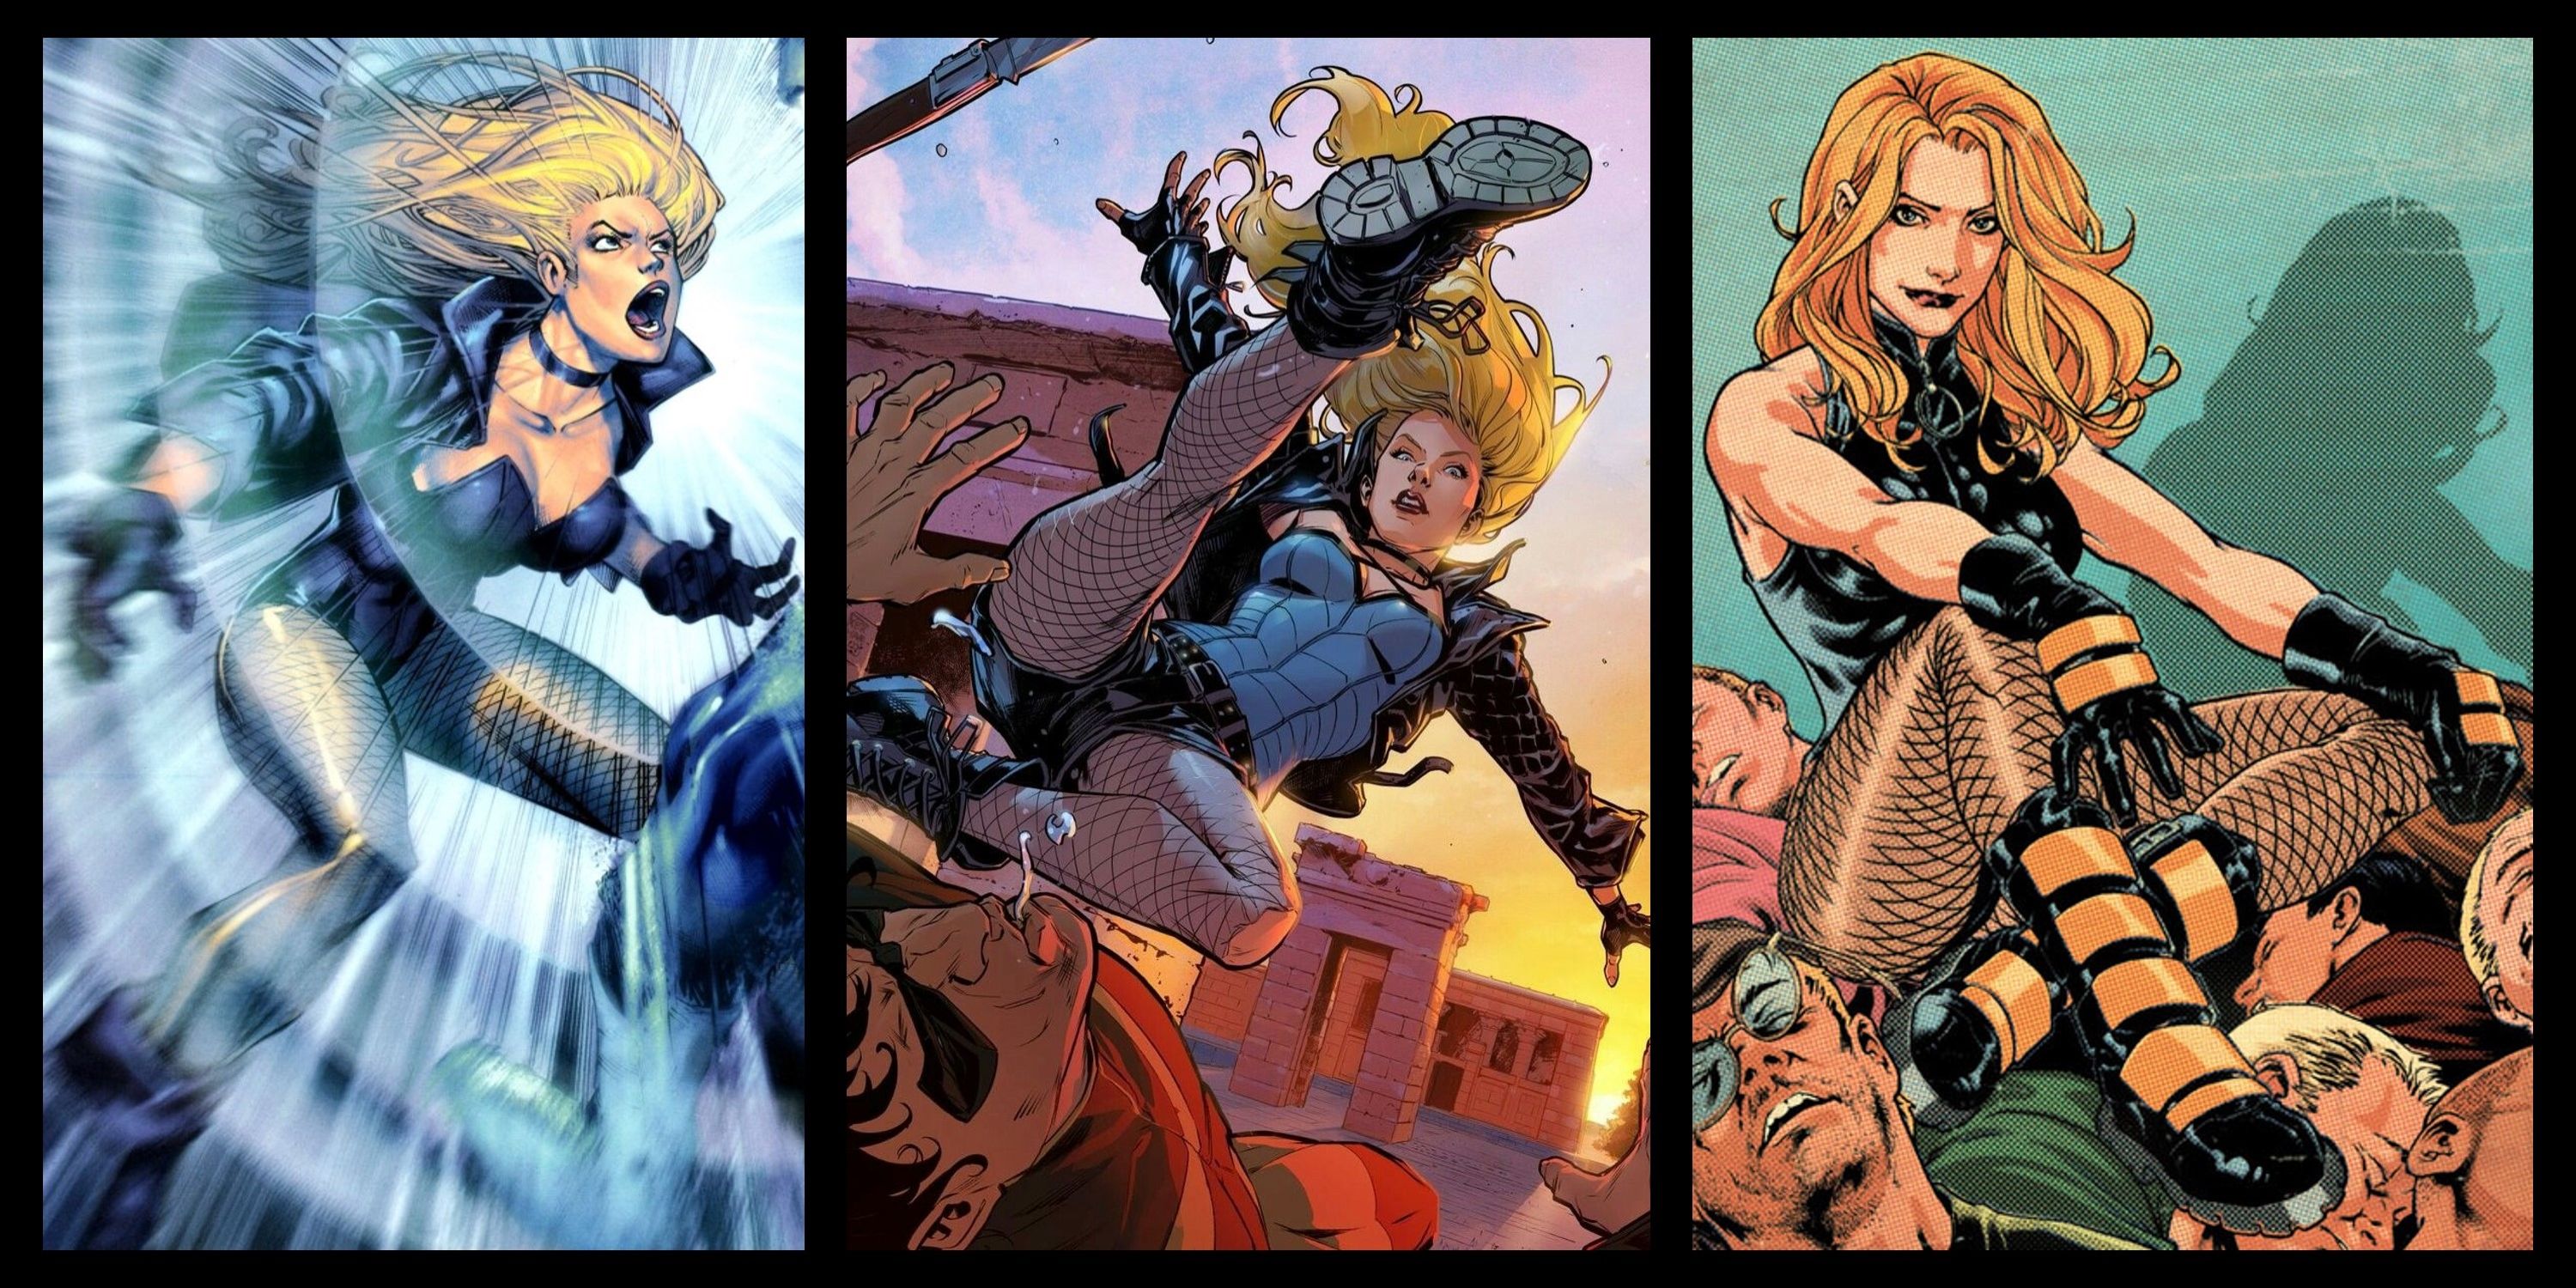 Split Image of Black Canary's Cry, kicking and seated on foes in DC Comics